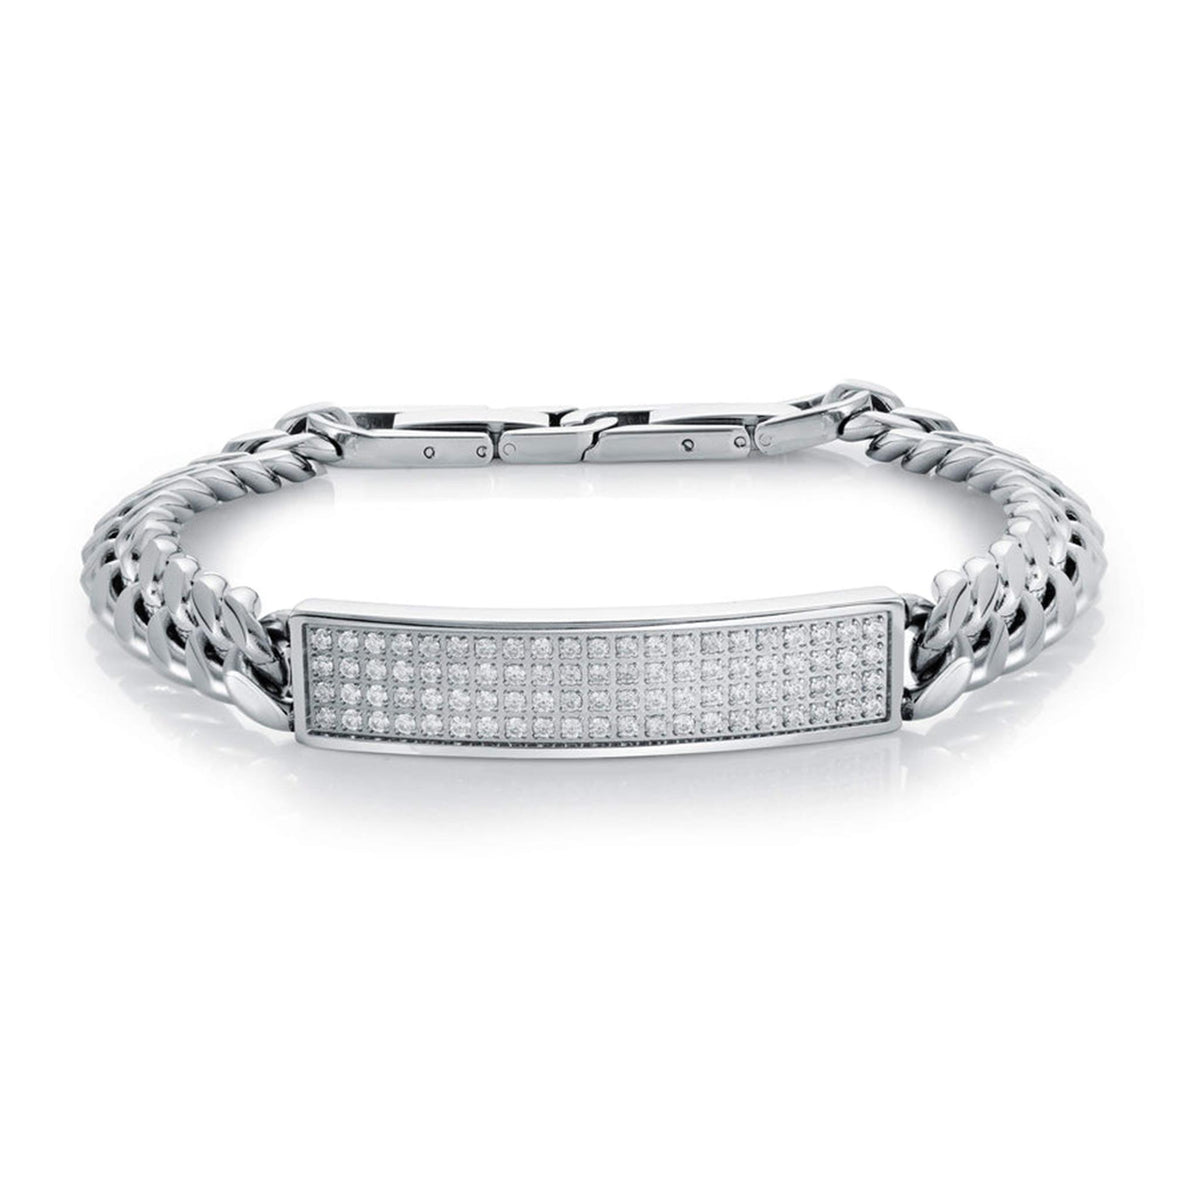 Italgem Stainless Steel Curb Link ID Bracelet with Cubic Zirconia